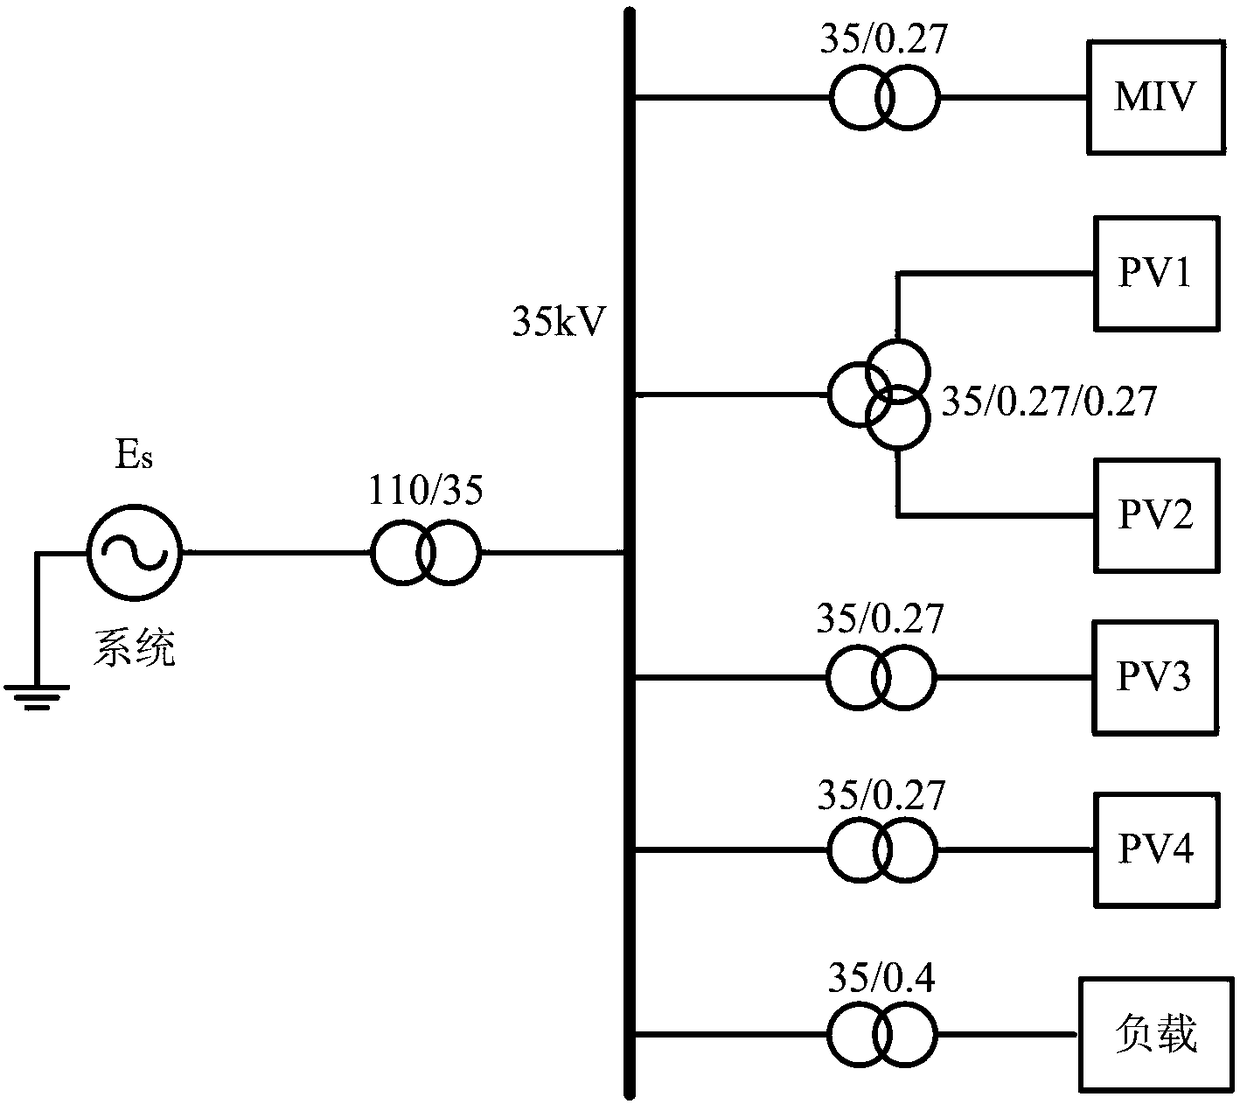 Multi-inverter active power control method for photovoltaic power station